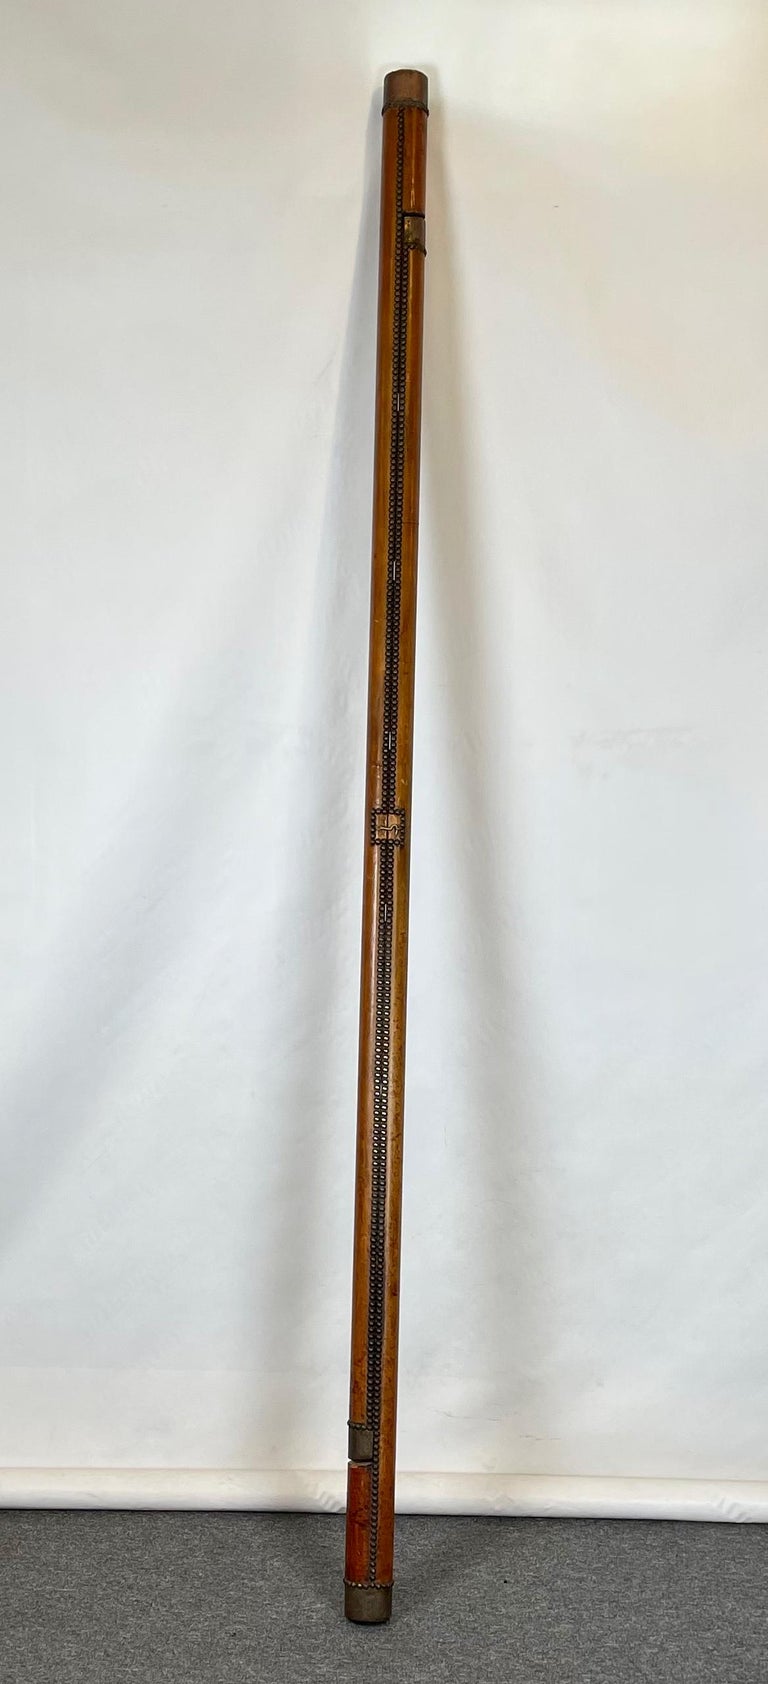 An English Edwardian folding mahogany pole ladder in deep brown leather and brass nailheads opening to seven rungs.